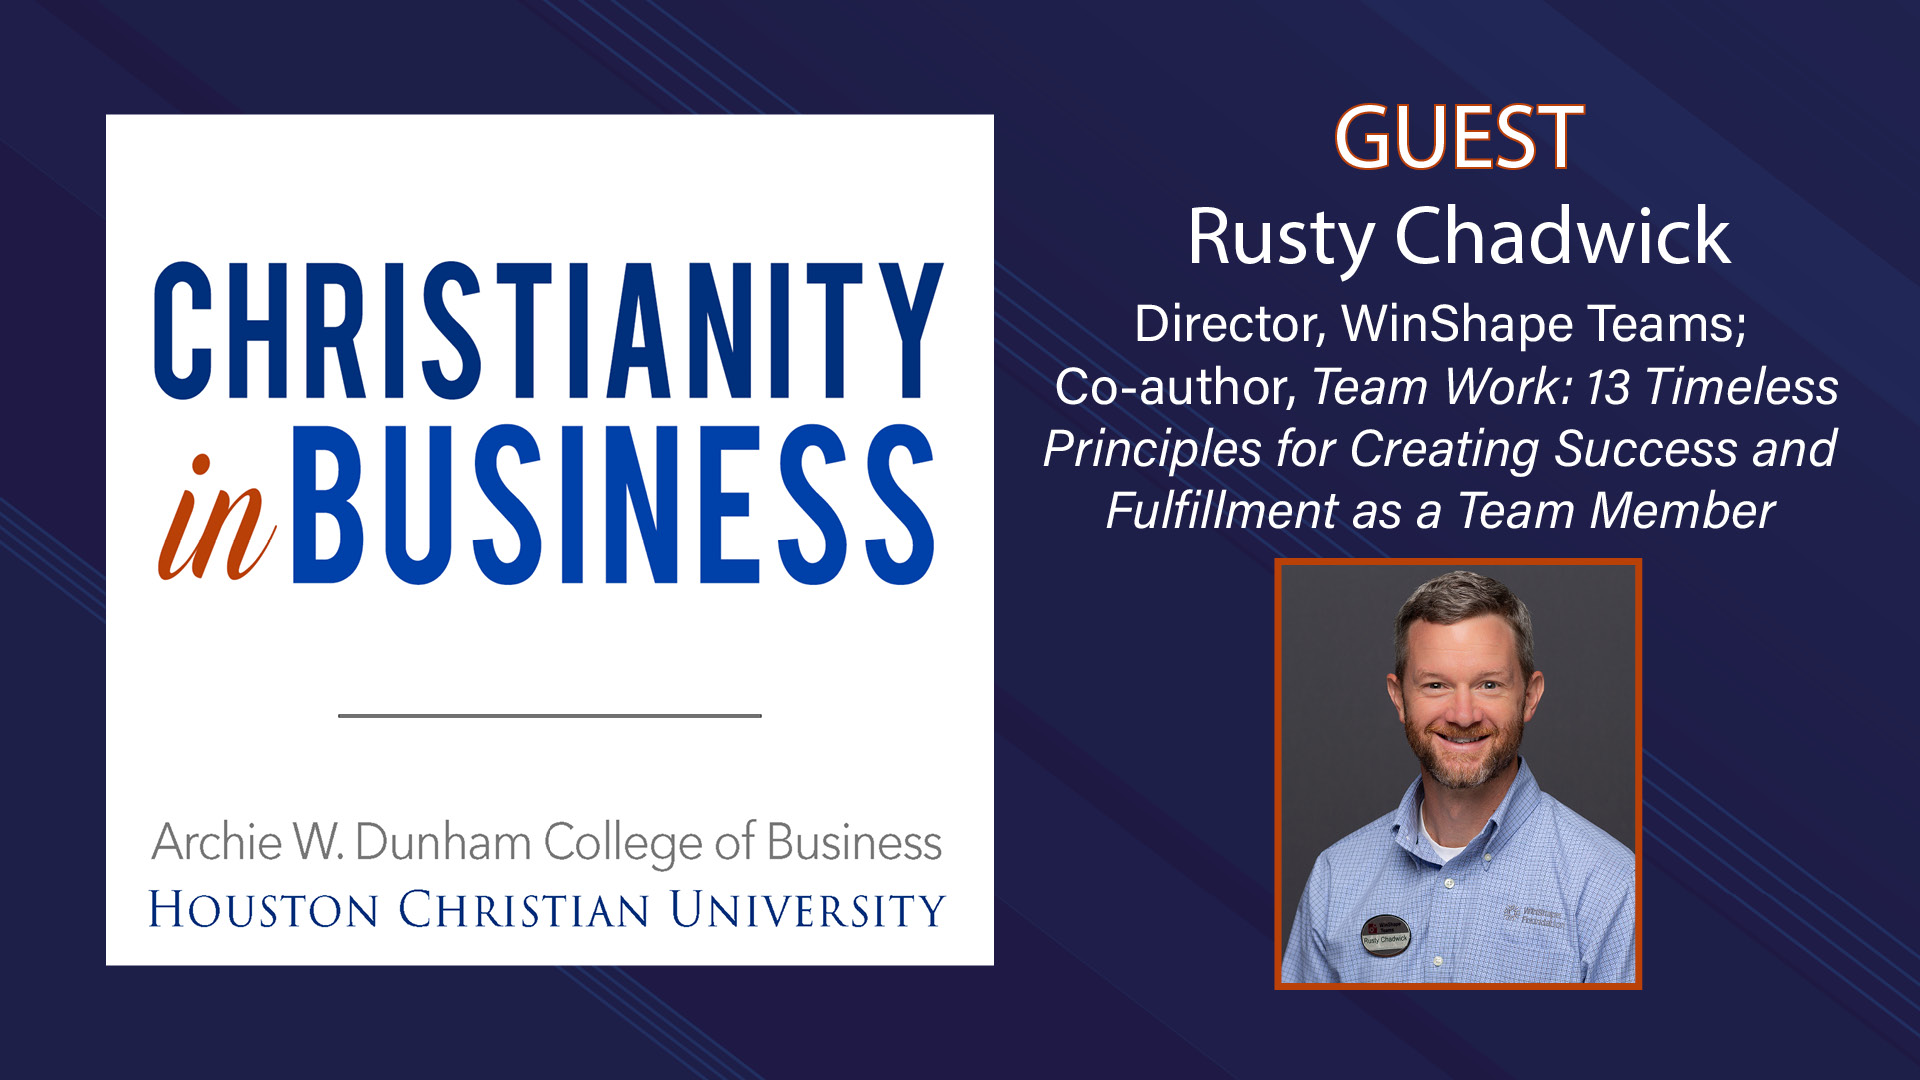 Rusty Chadwick, Director of Winshape Teams and Co-author of Team Work: 13 Timeless Principles for Creating Success and Fulfillment as a Team Member, joins as guest on Christianity in Business Podcast. 